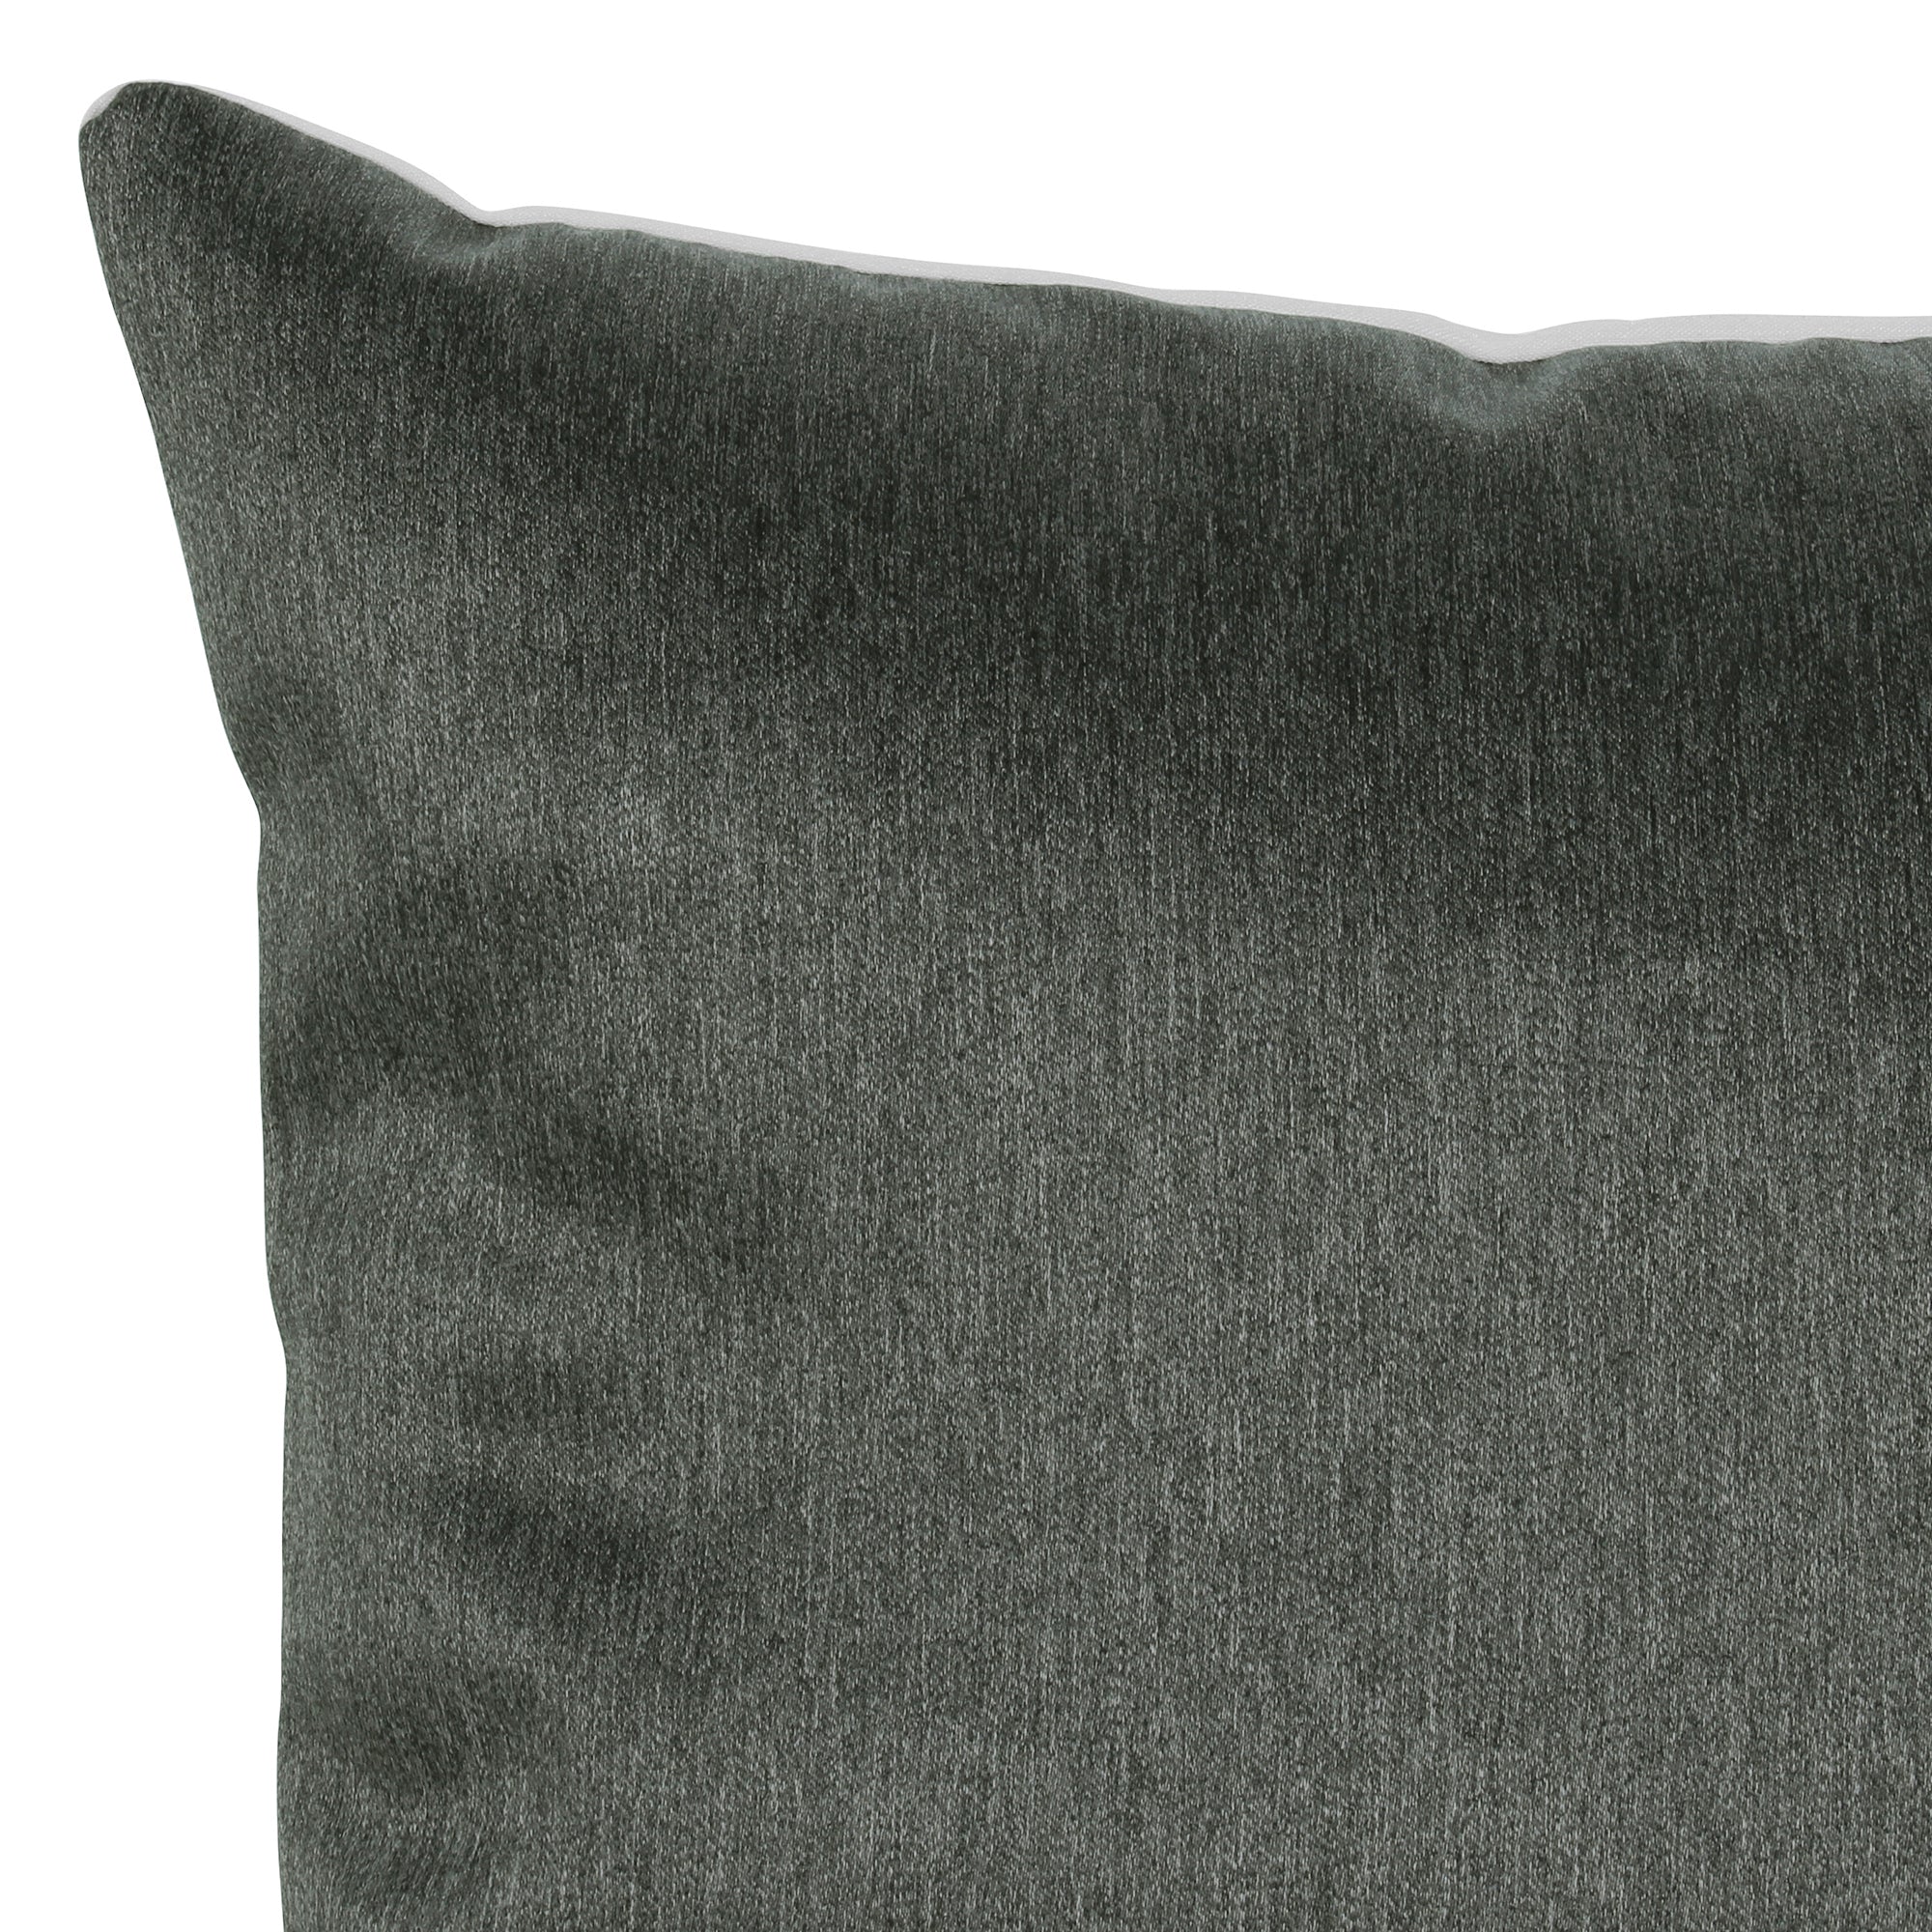 Story@Home Metal Grey Plain Polyester 6 pcs of Alegra Cushion Covers